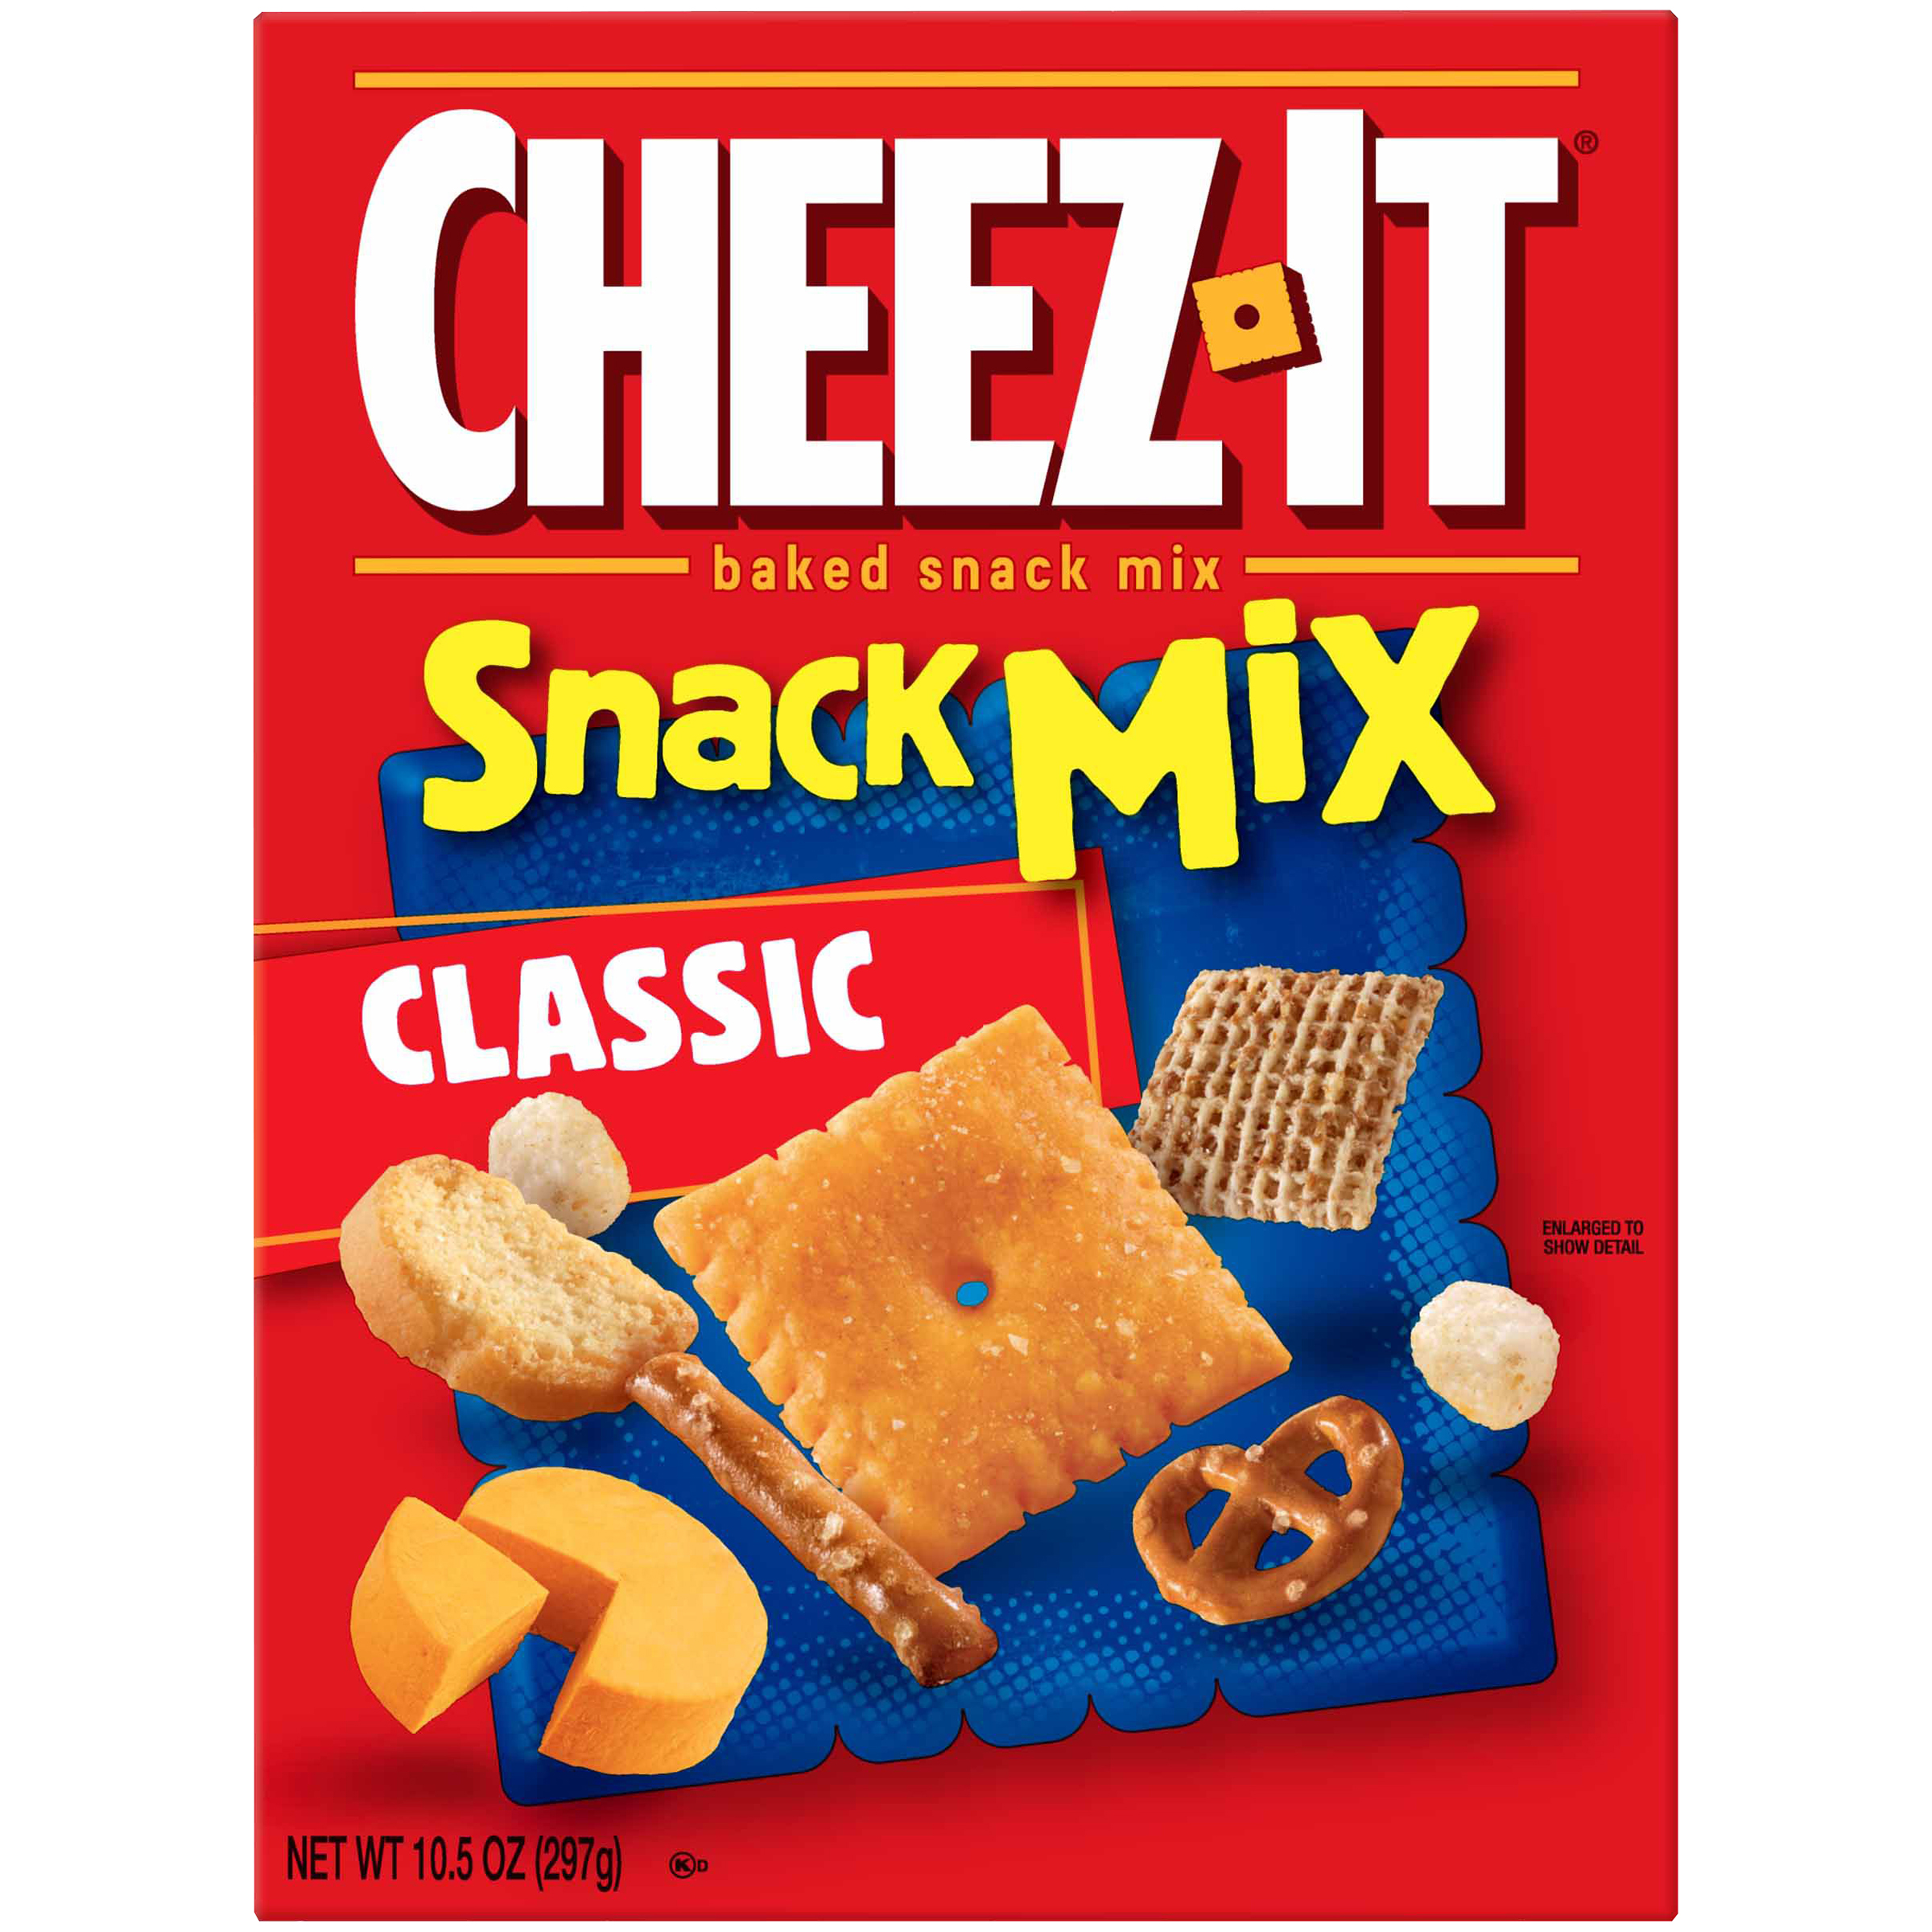 Cheez It Classic Baked Snack Mix 10 5 Oz Box